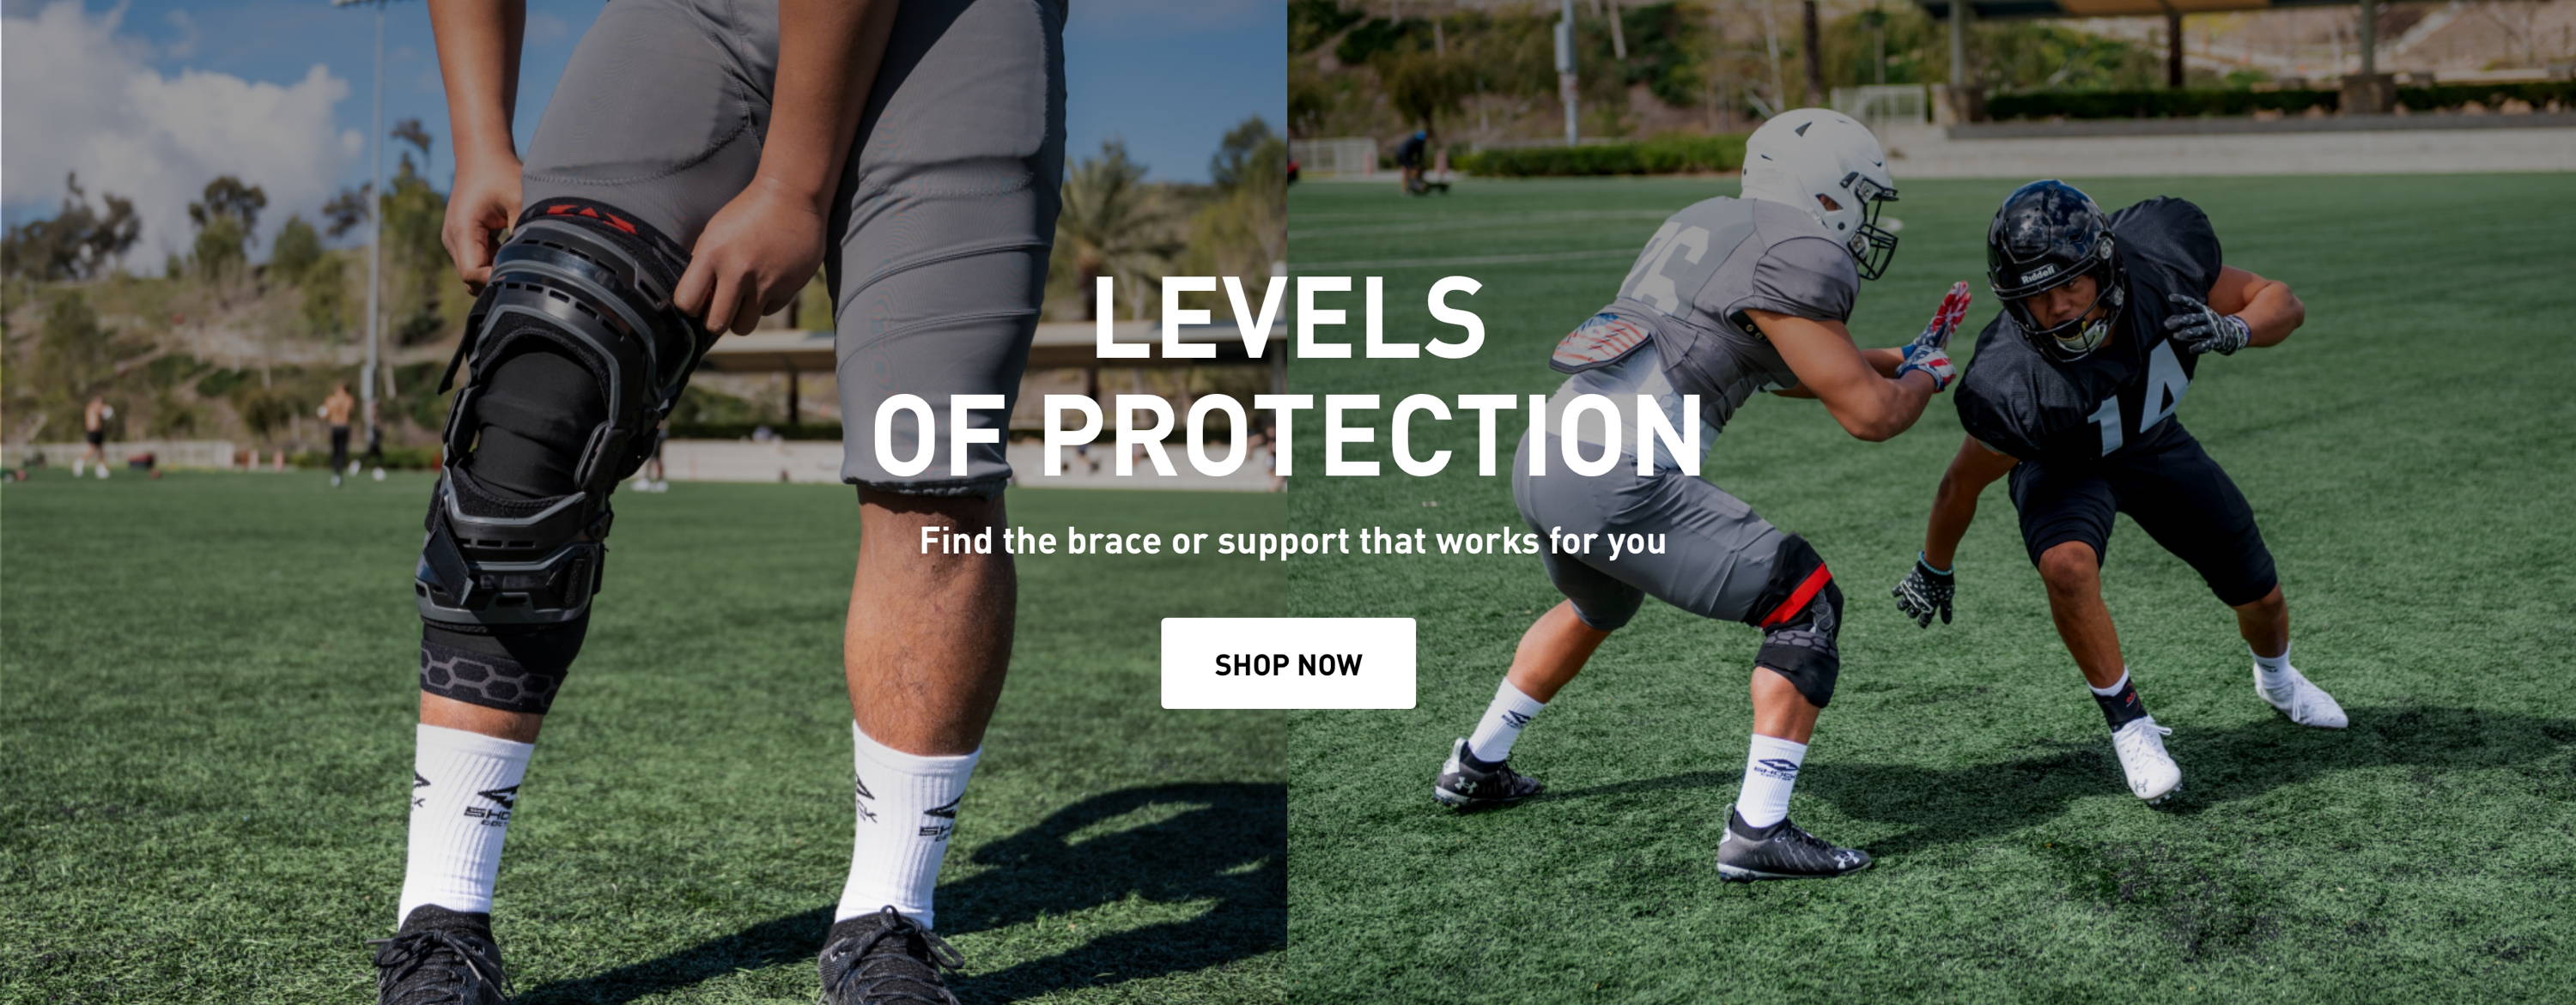 Levels of Protection. Find the brace of support that works for you. SHOP NOW